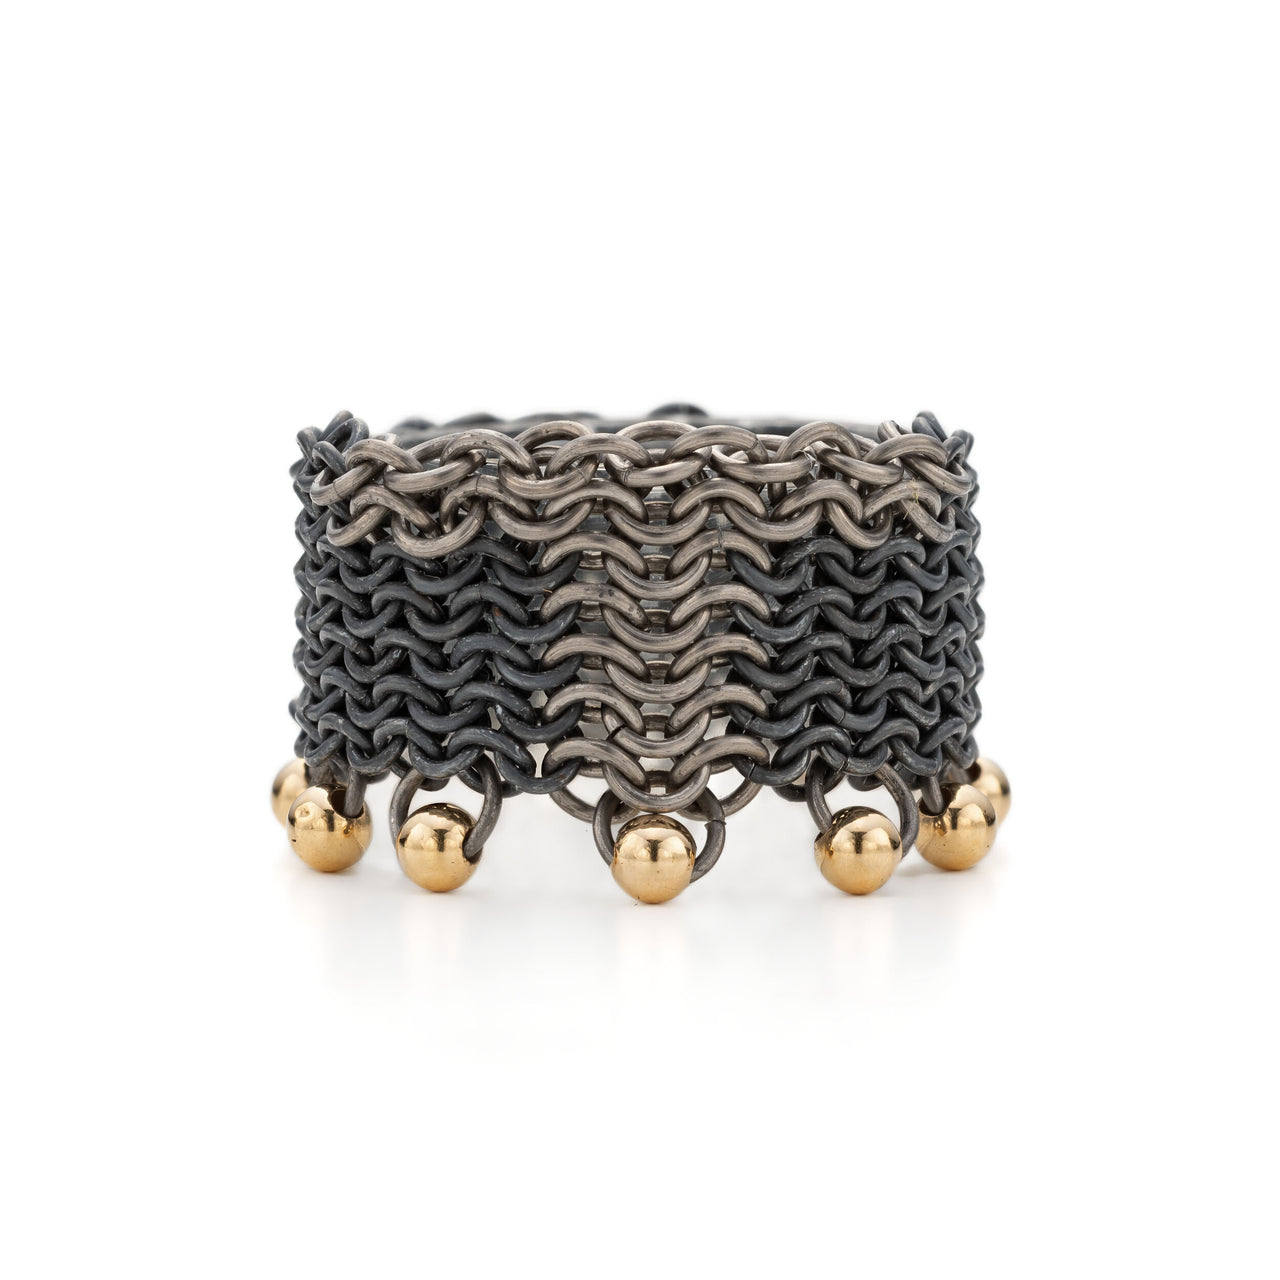 ThunderBolt || ring handmade contemporary chainmail ring handcrafted titanium, recycled oxidised silver and 18ct yellow gold chains by Corrinne Eira Evans